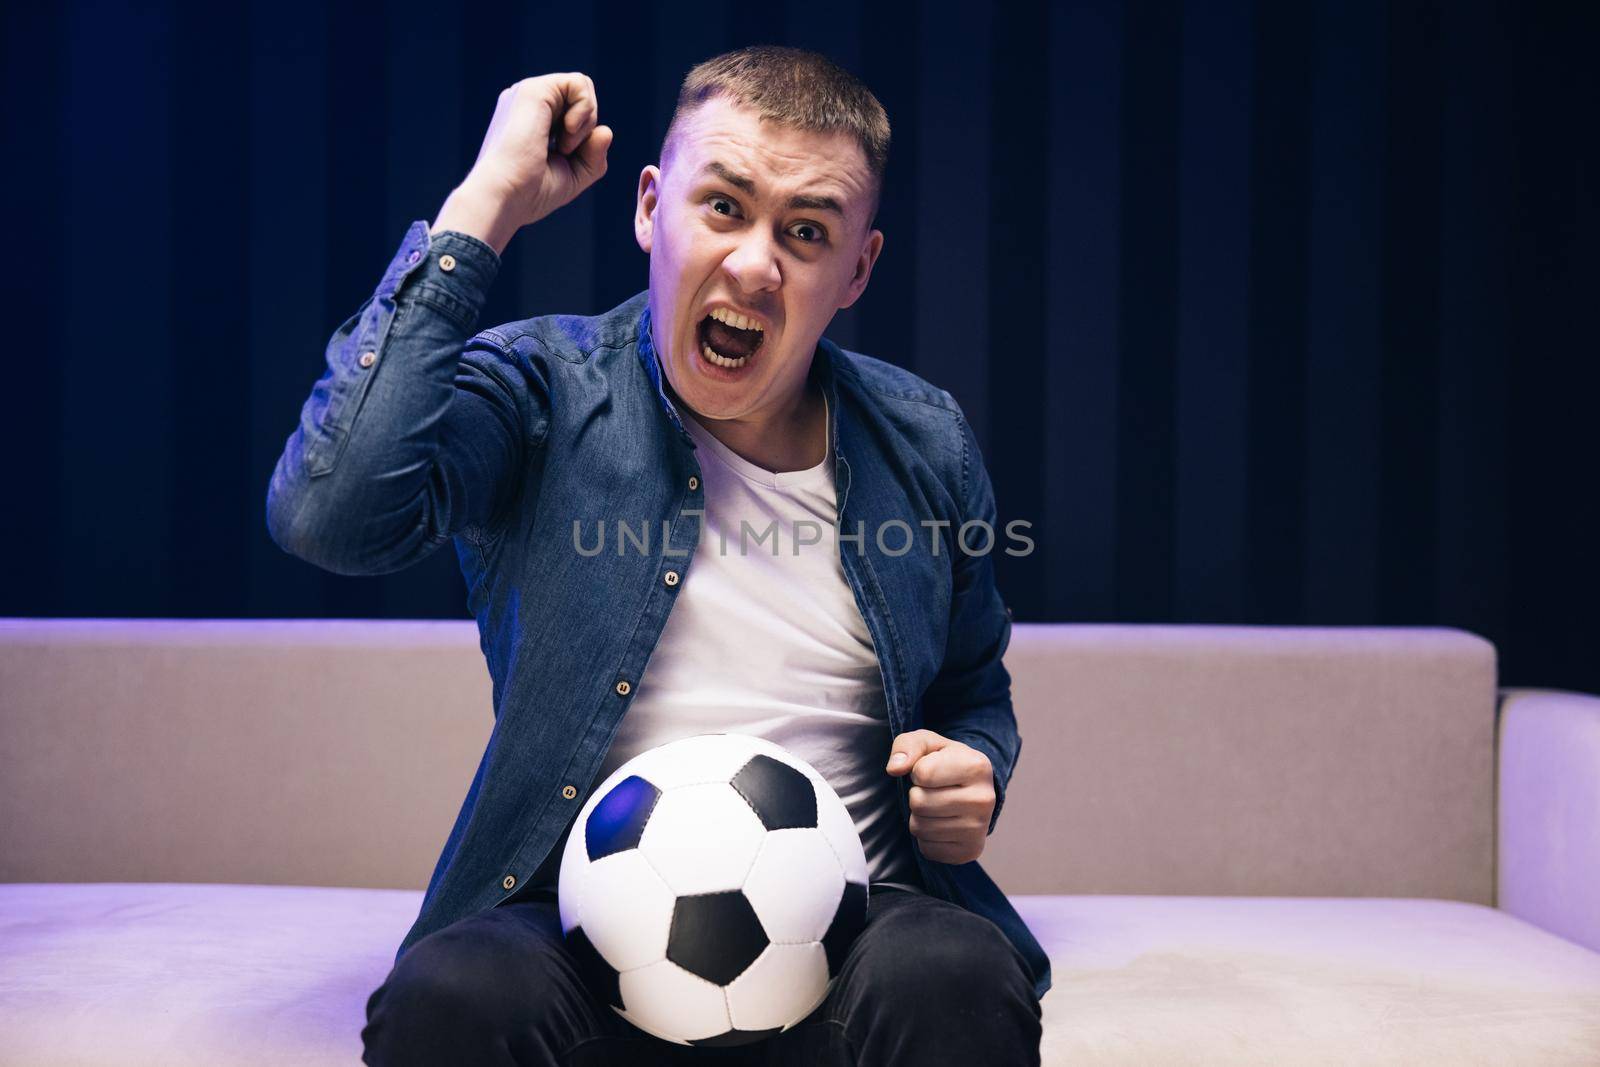 Young fun guy 25s football fan cheer up support favorite team hold ball in denim jacket white t-shirt in dark living room. People emotions sport leisure lifestyle concept.